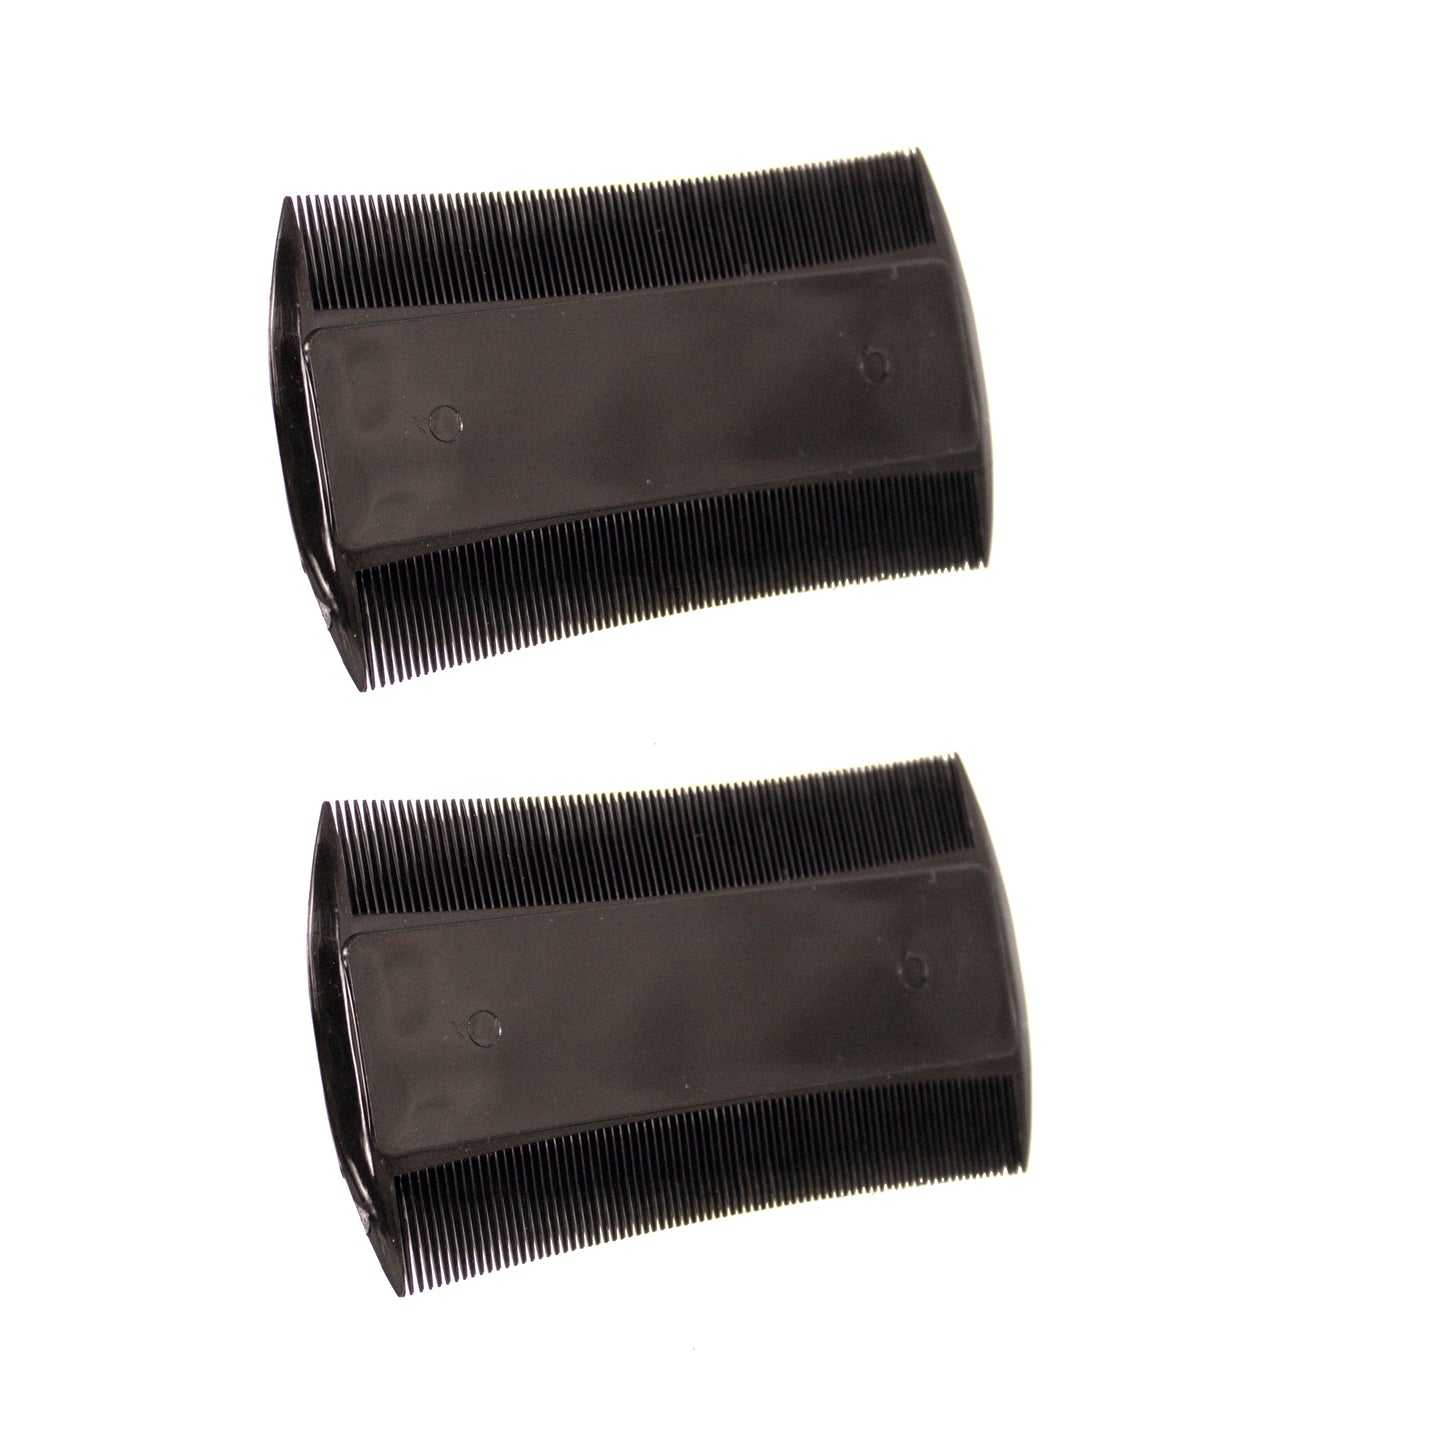 Amelia Beauty, 3in Black Plastic Personal Hygiene Mustache Comb, Made in USA, Professional Grade Comb, Portable Salon Barber Shop Black Lice Everyday Styling  Mustashe Comb Hair, Styling Tool, 2 Pack